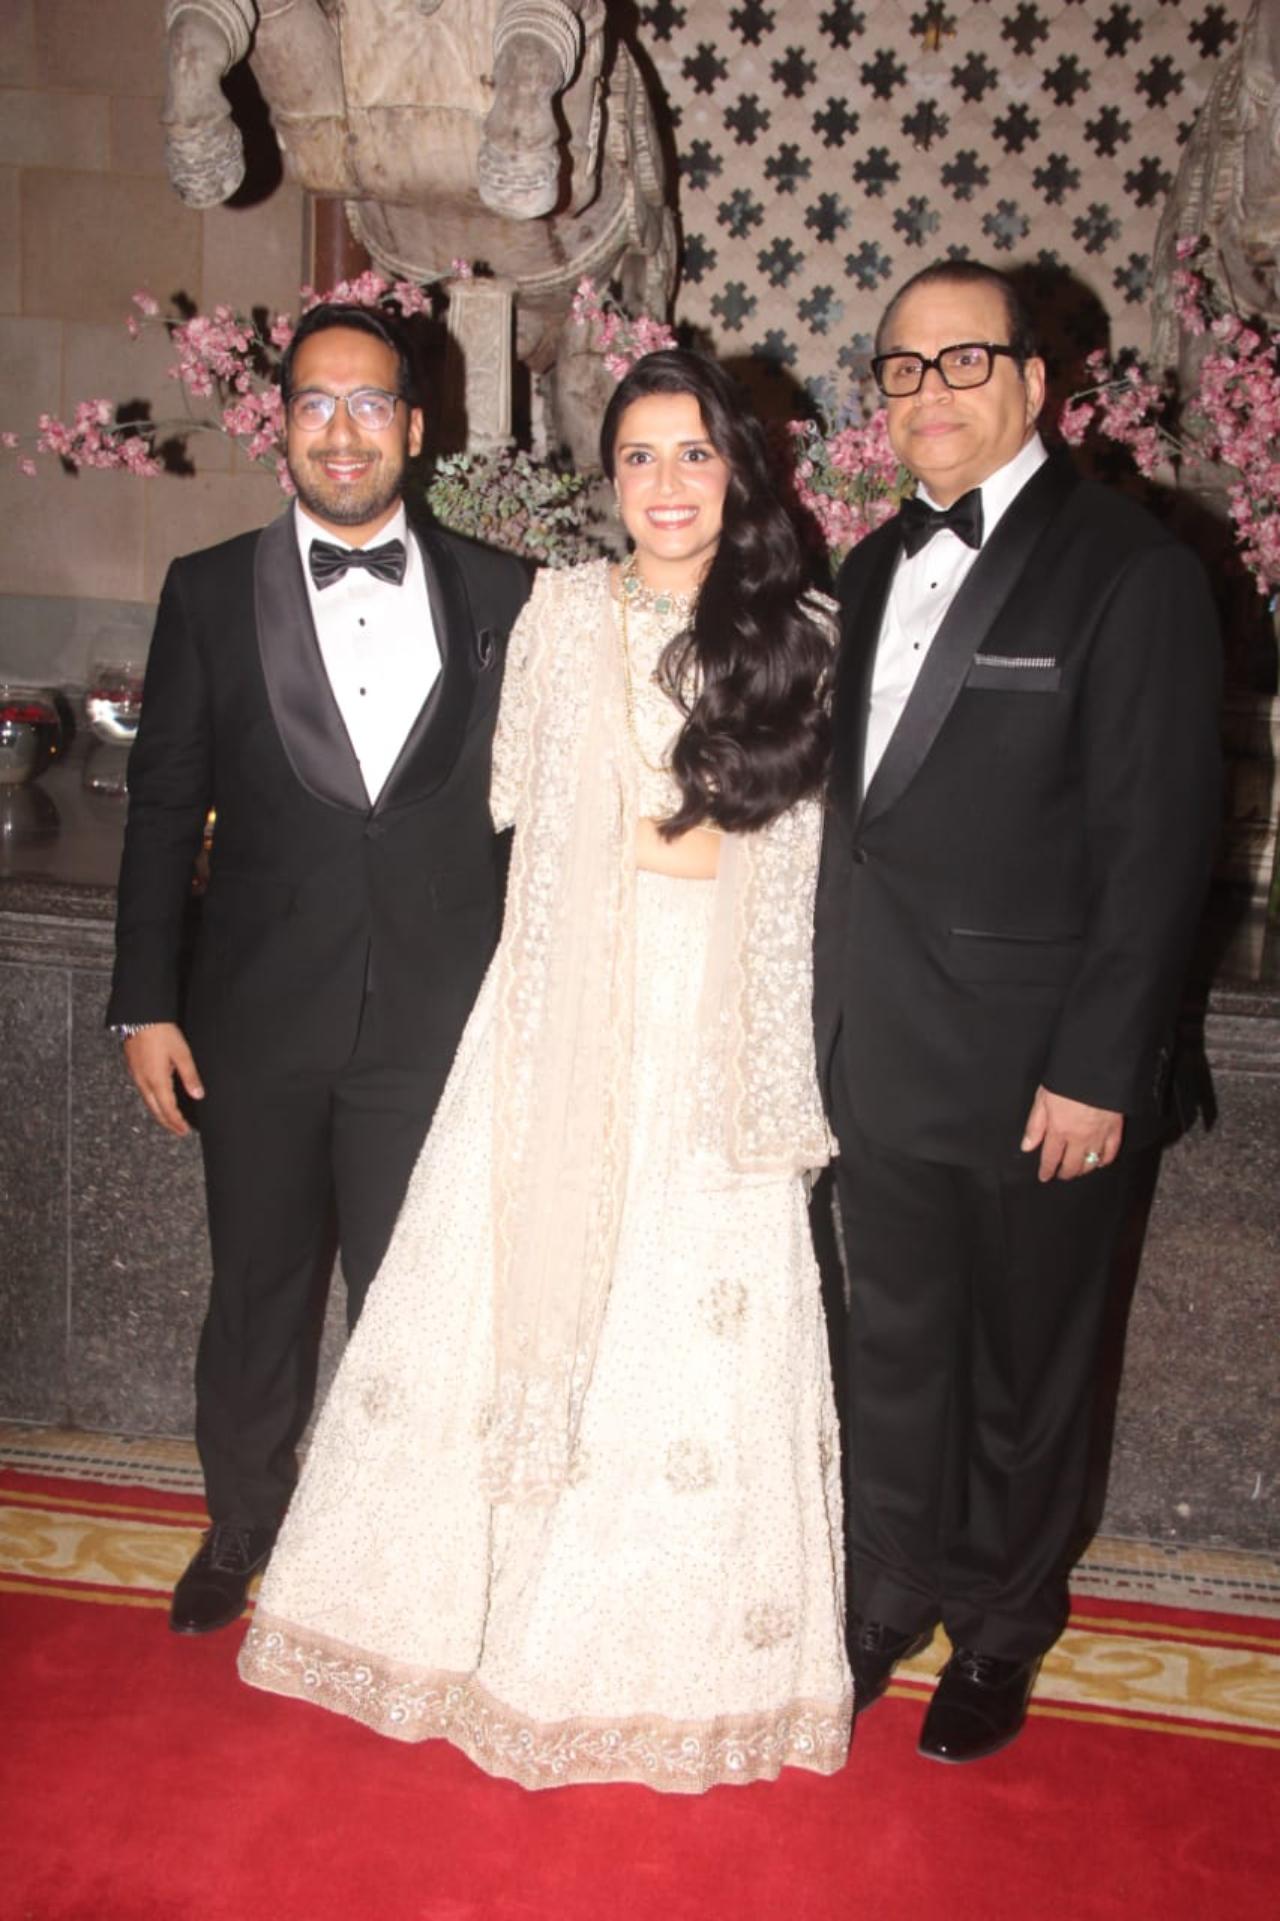 Ramesh Taurani also stepped out and posed with his daughter and son-in-law for the paparazzi